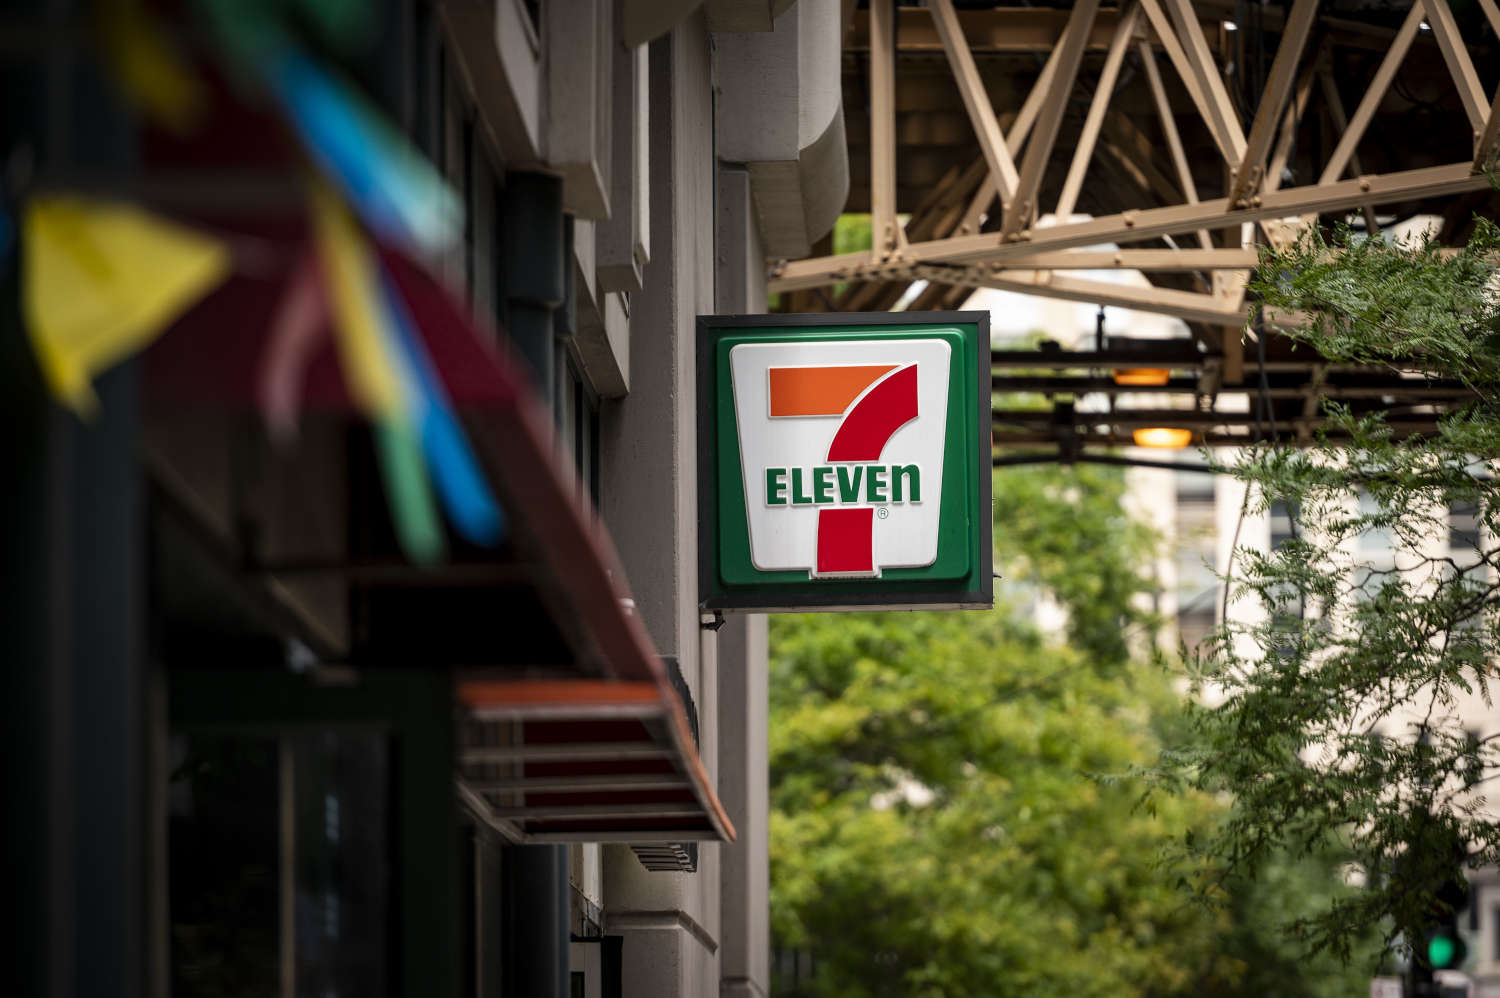 The cost to charge an electric car at 7-Eleven store like this can vary